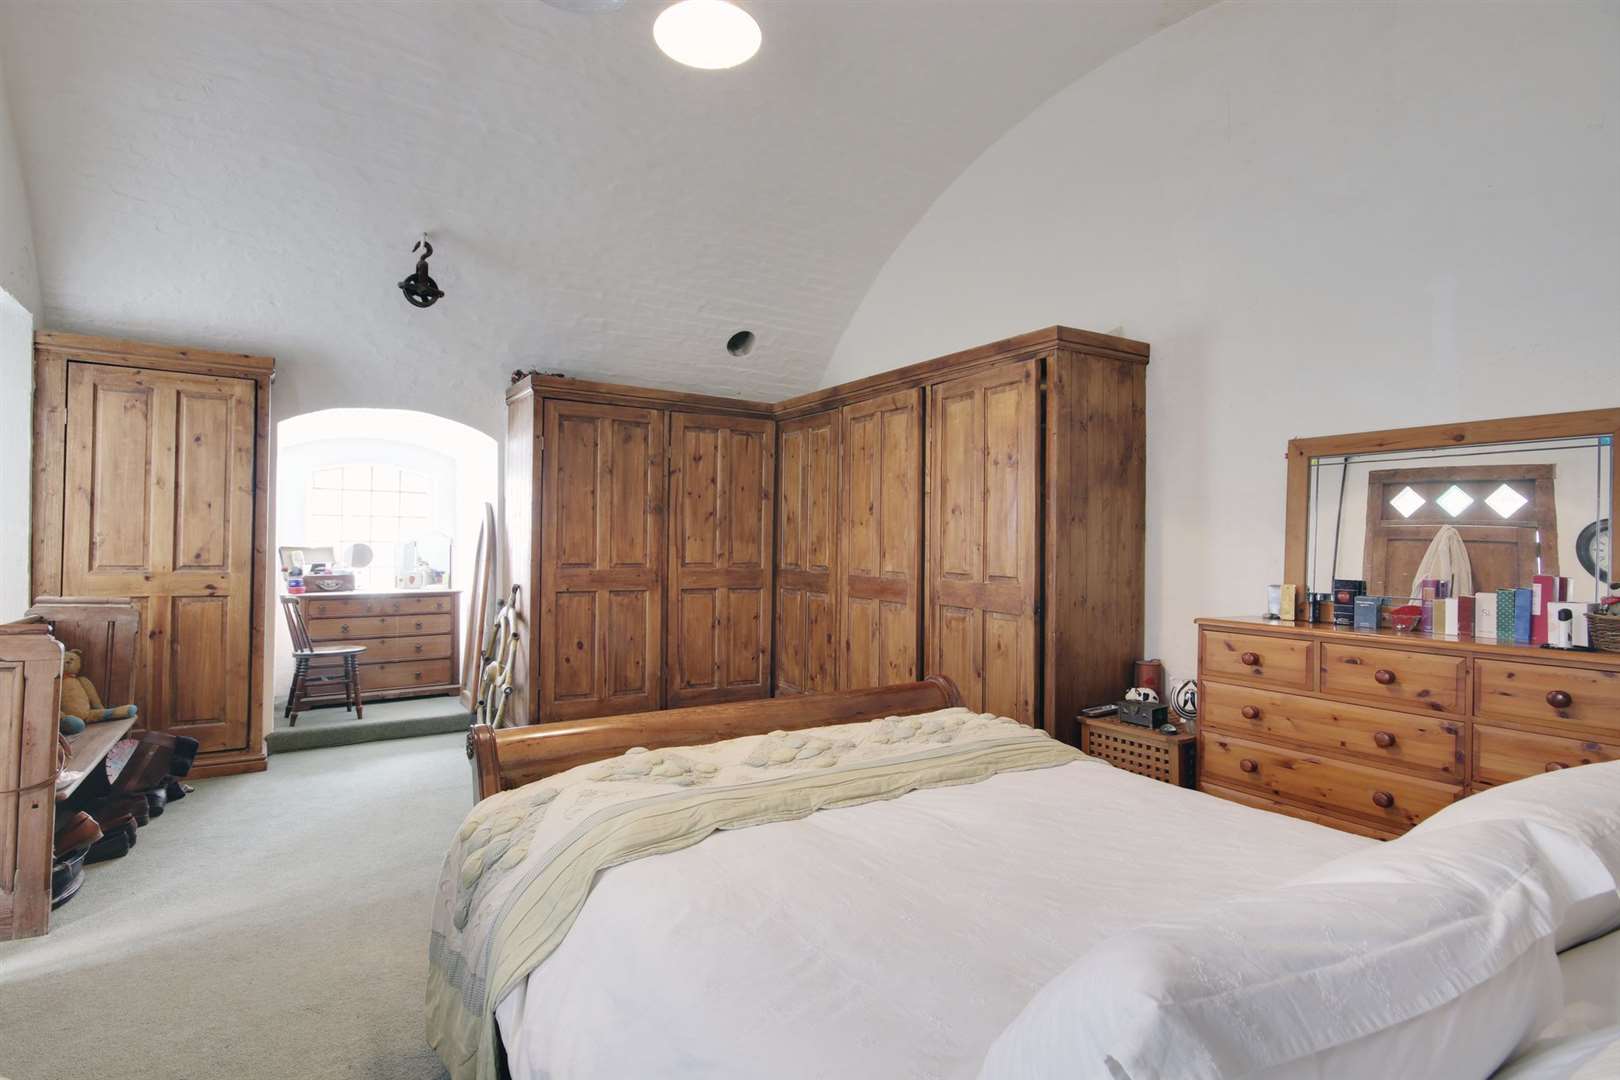 One of the main bedrooms inside the property. Photo: Savills